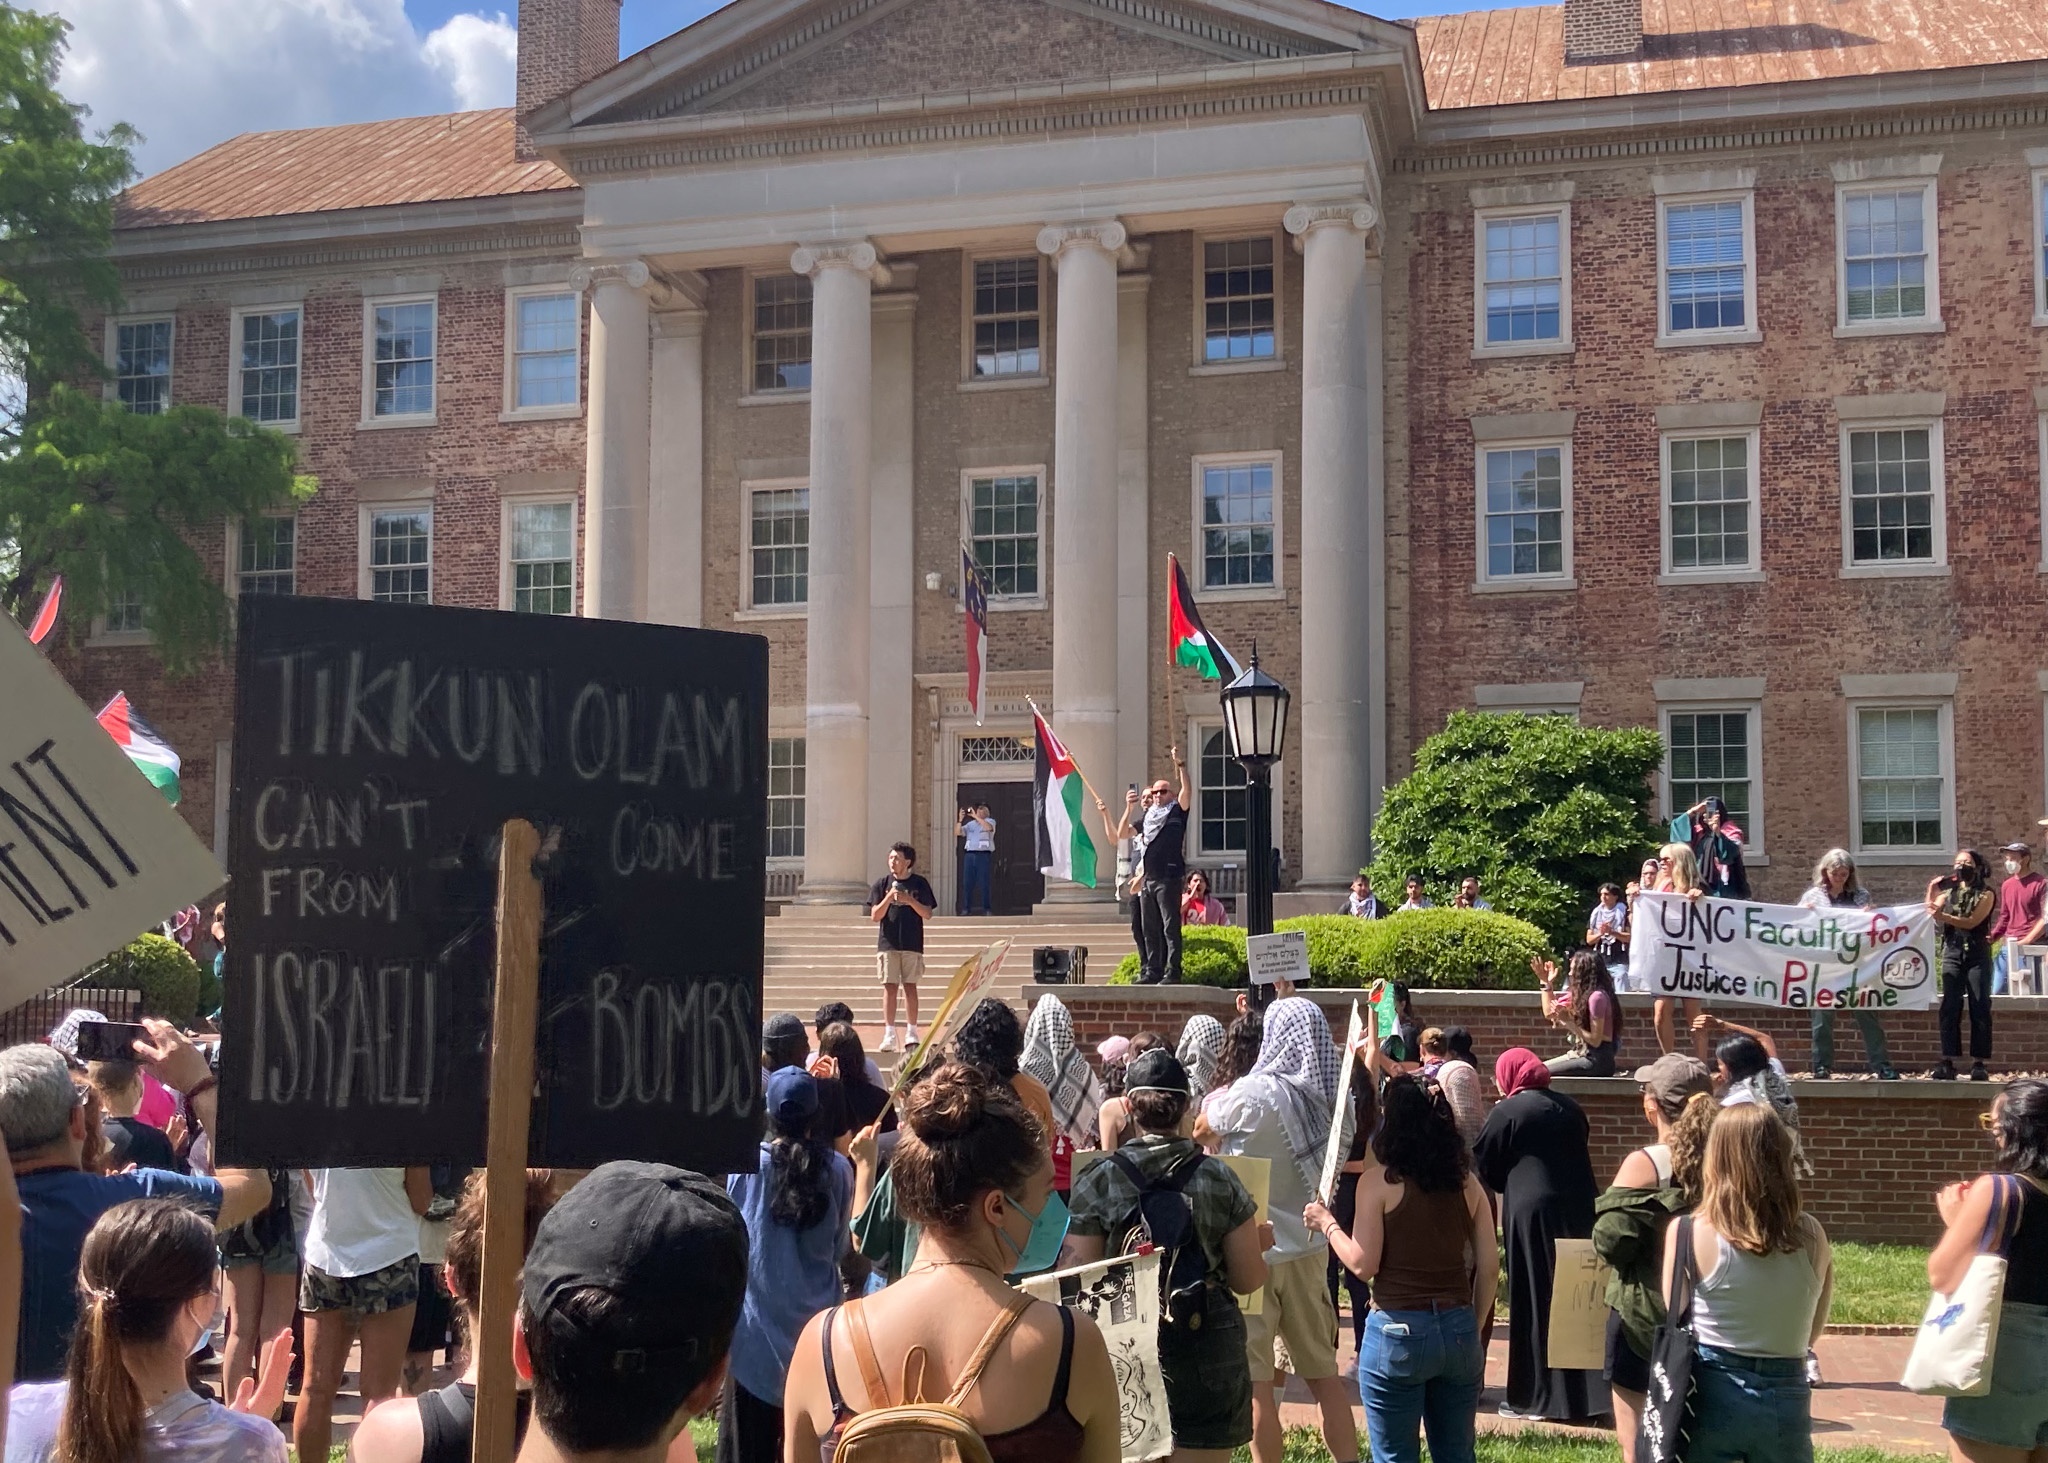 From-behind image of protestors in front of UNC's Wilson library. Two signs are visible: "Tikkun Olam can't come from Israel's bombs" and "UNC Faculty for Justice in Palestine." Speakers at the front hold Palestinian flags.